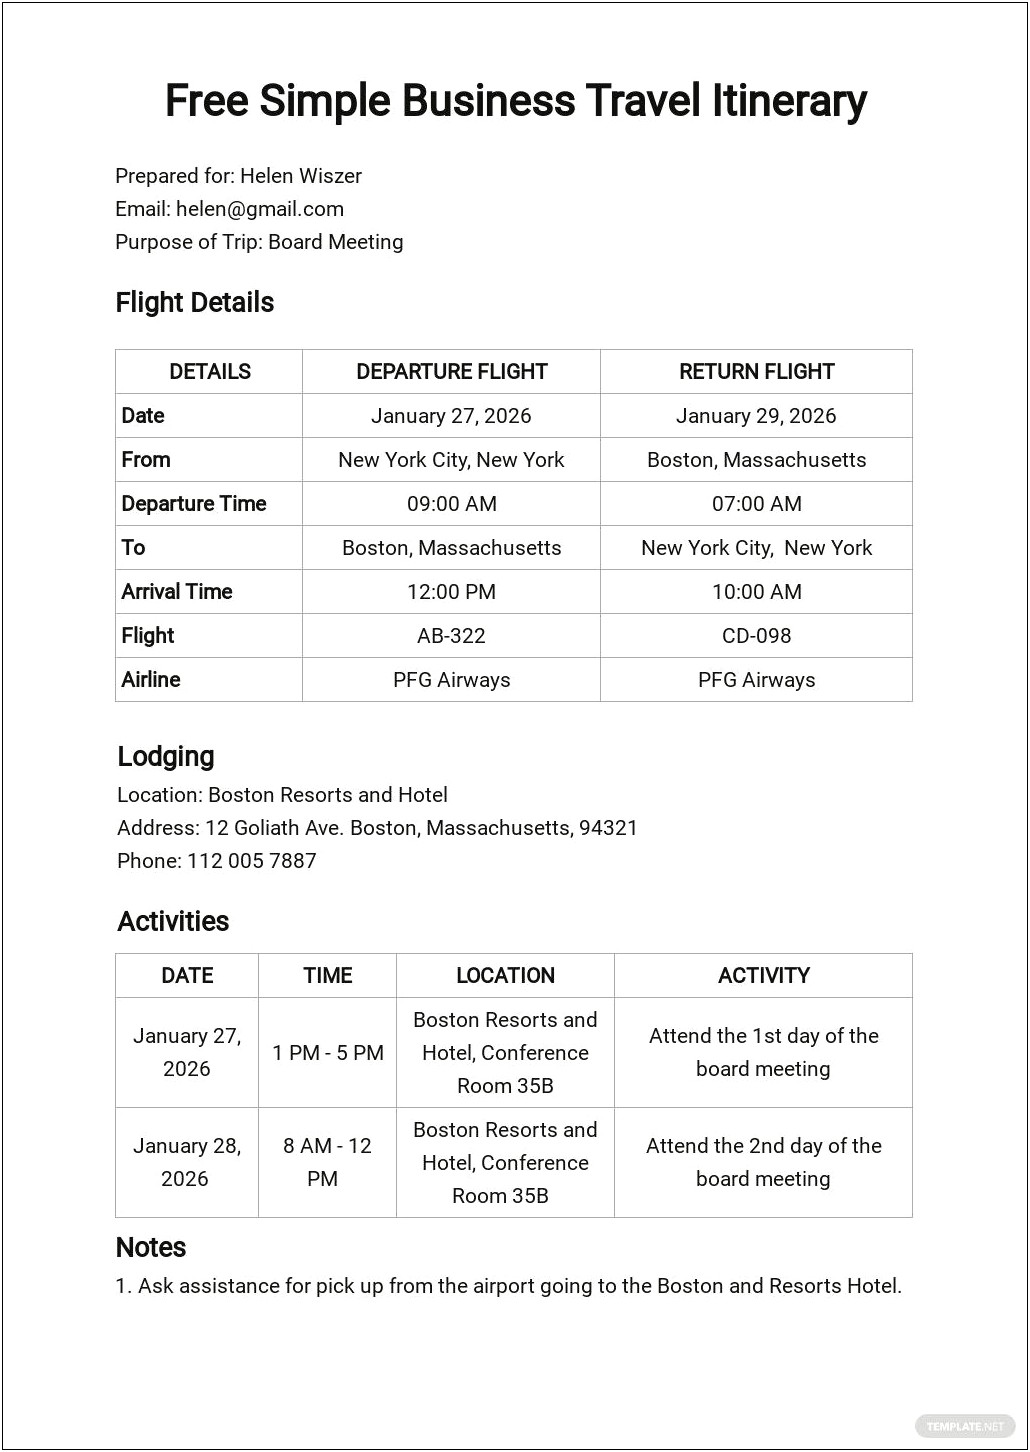 free-vacation-itinerary-template-google-docs-resume-example-gallery